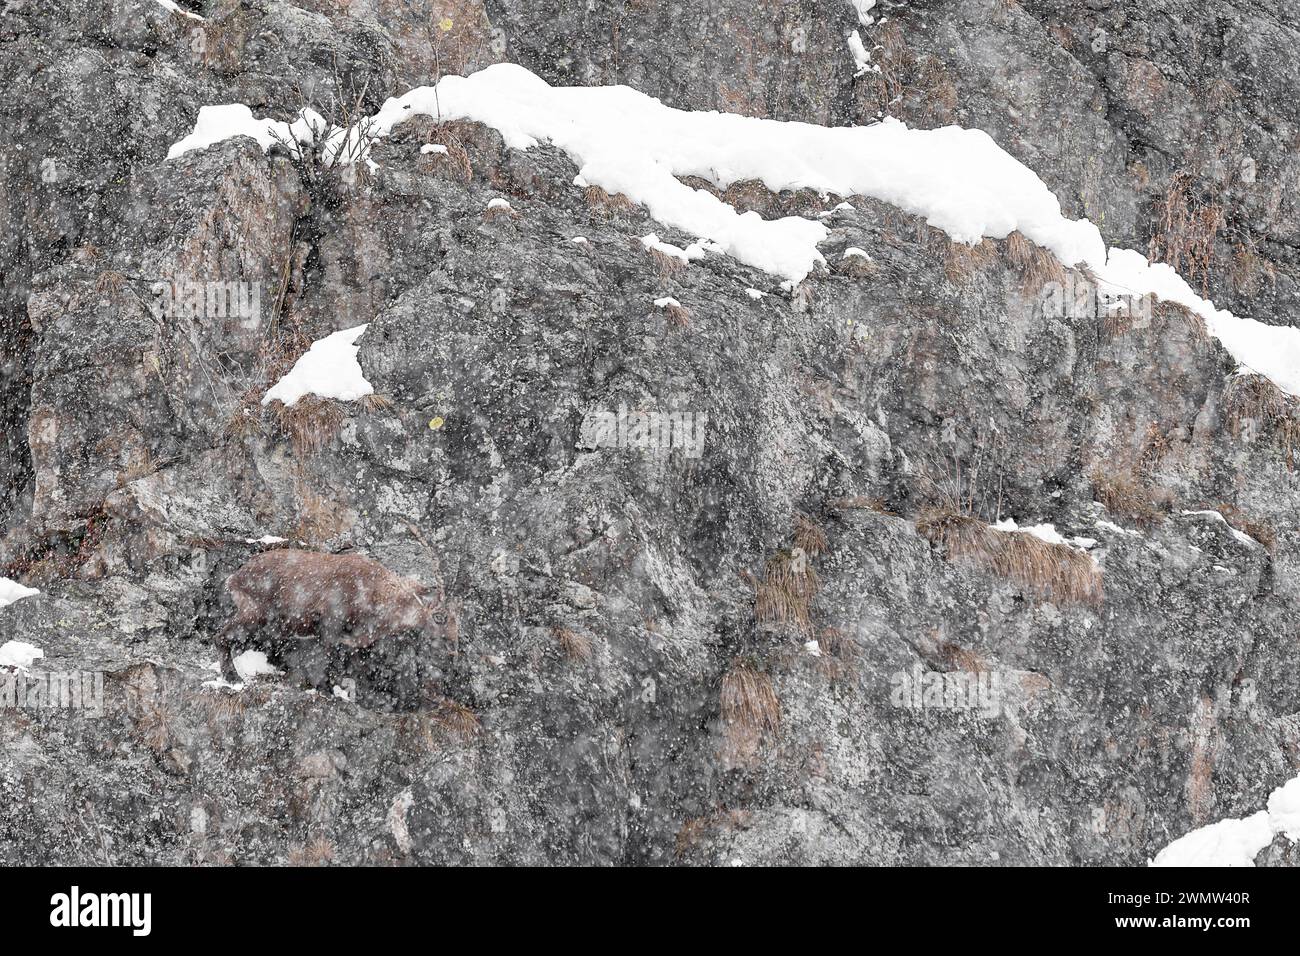 Snowstorm in the Alps mountains with ibex male, fine art landscape (Capra Ibex) Stock Photo